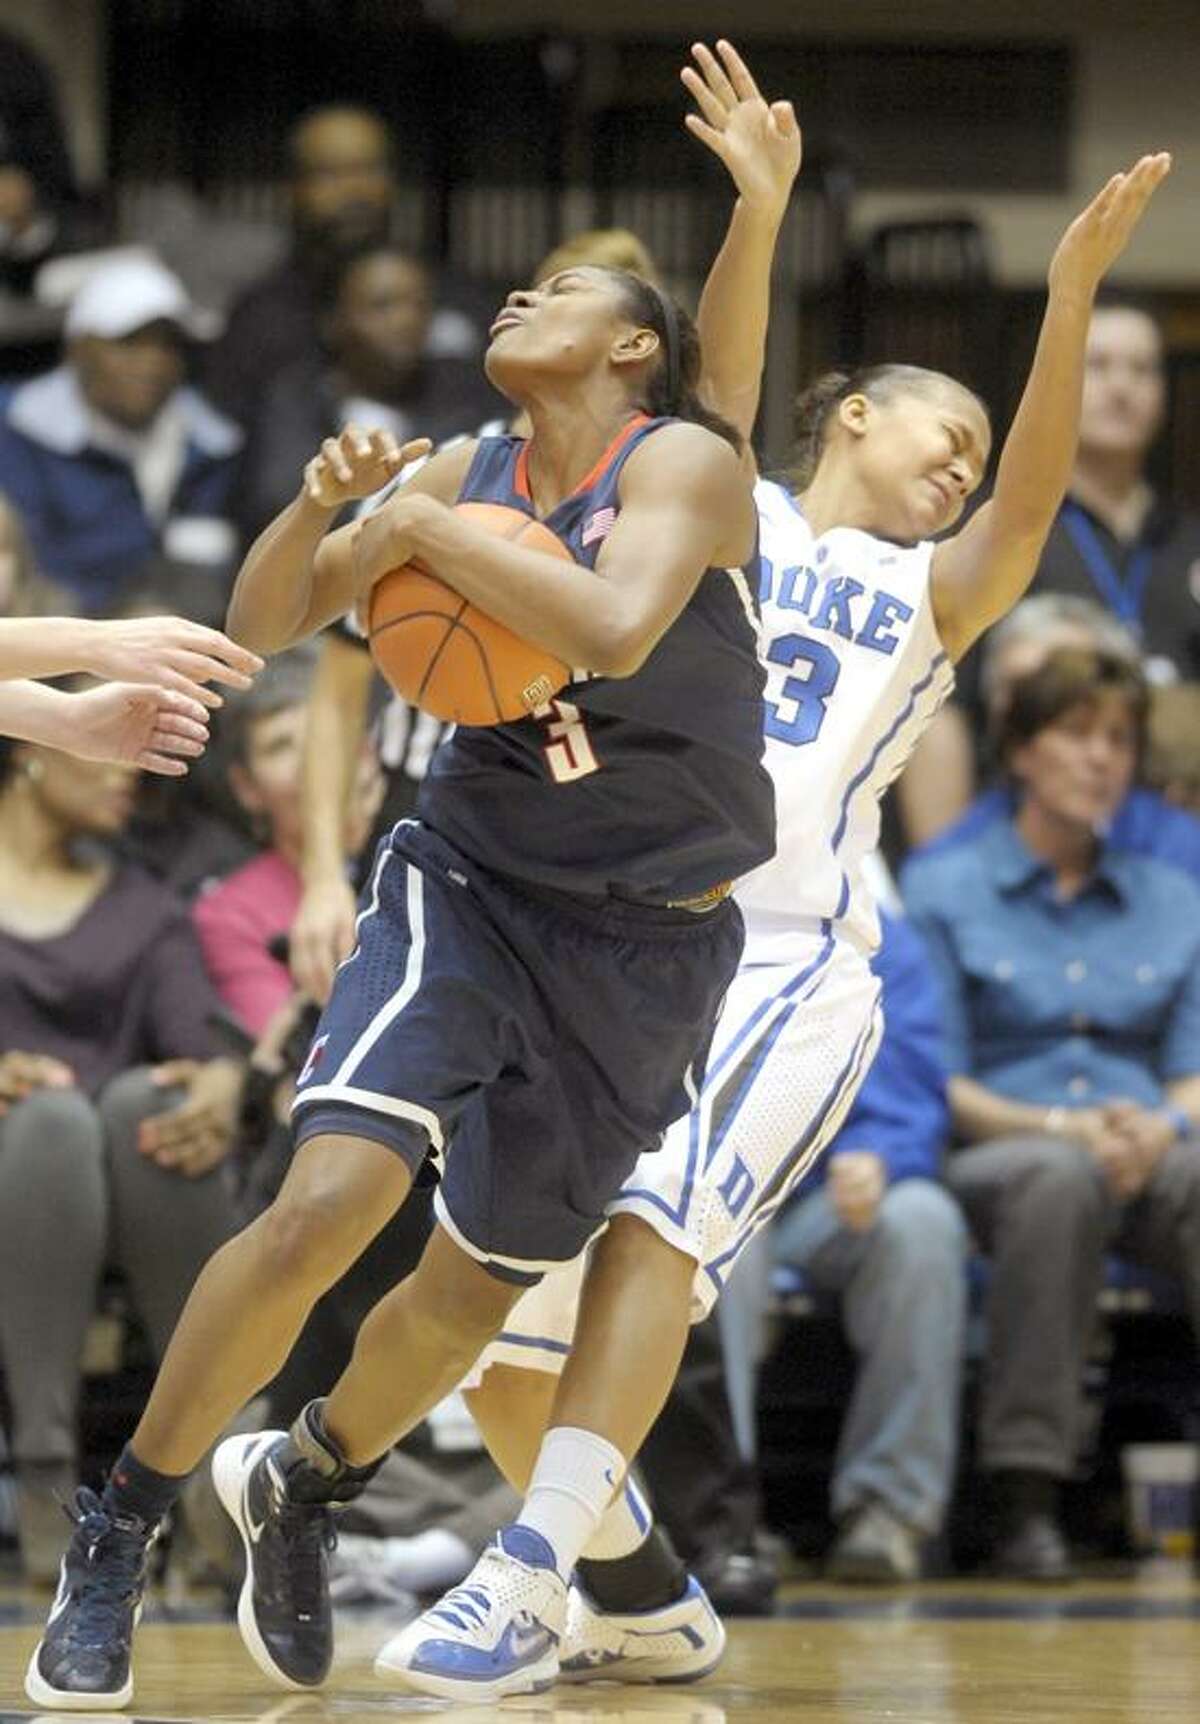 Duke's Shay Selby (3) collides Connecticut's Tiffany Hayes (3) during the first half of an NCAA women's college basketball game, Monday, Jan. 30, 2012, in Durham, N.C. (AP Photo/Sara D. Davis)